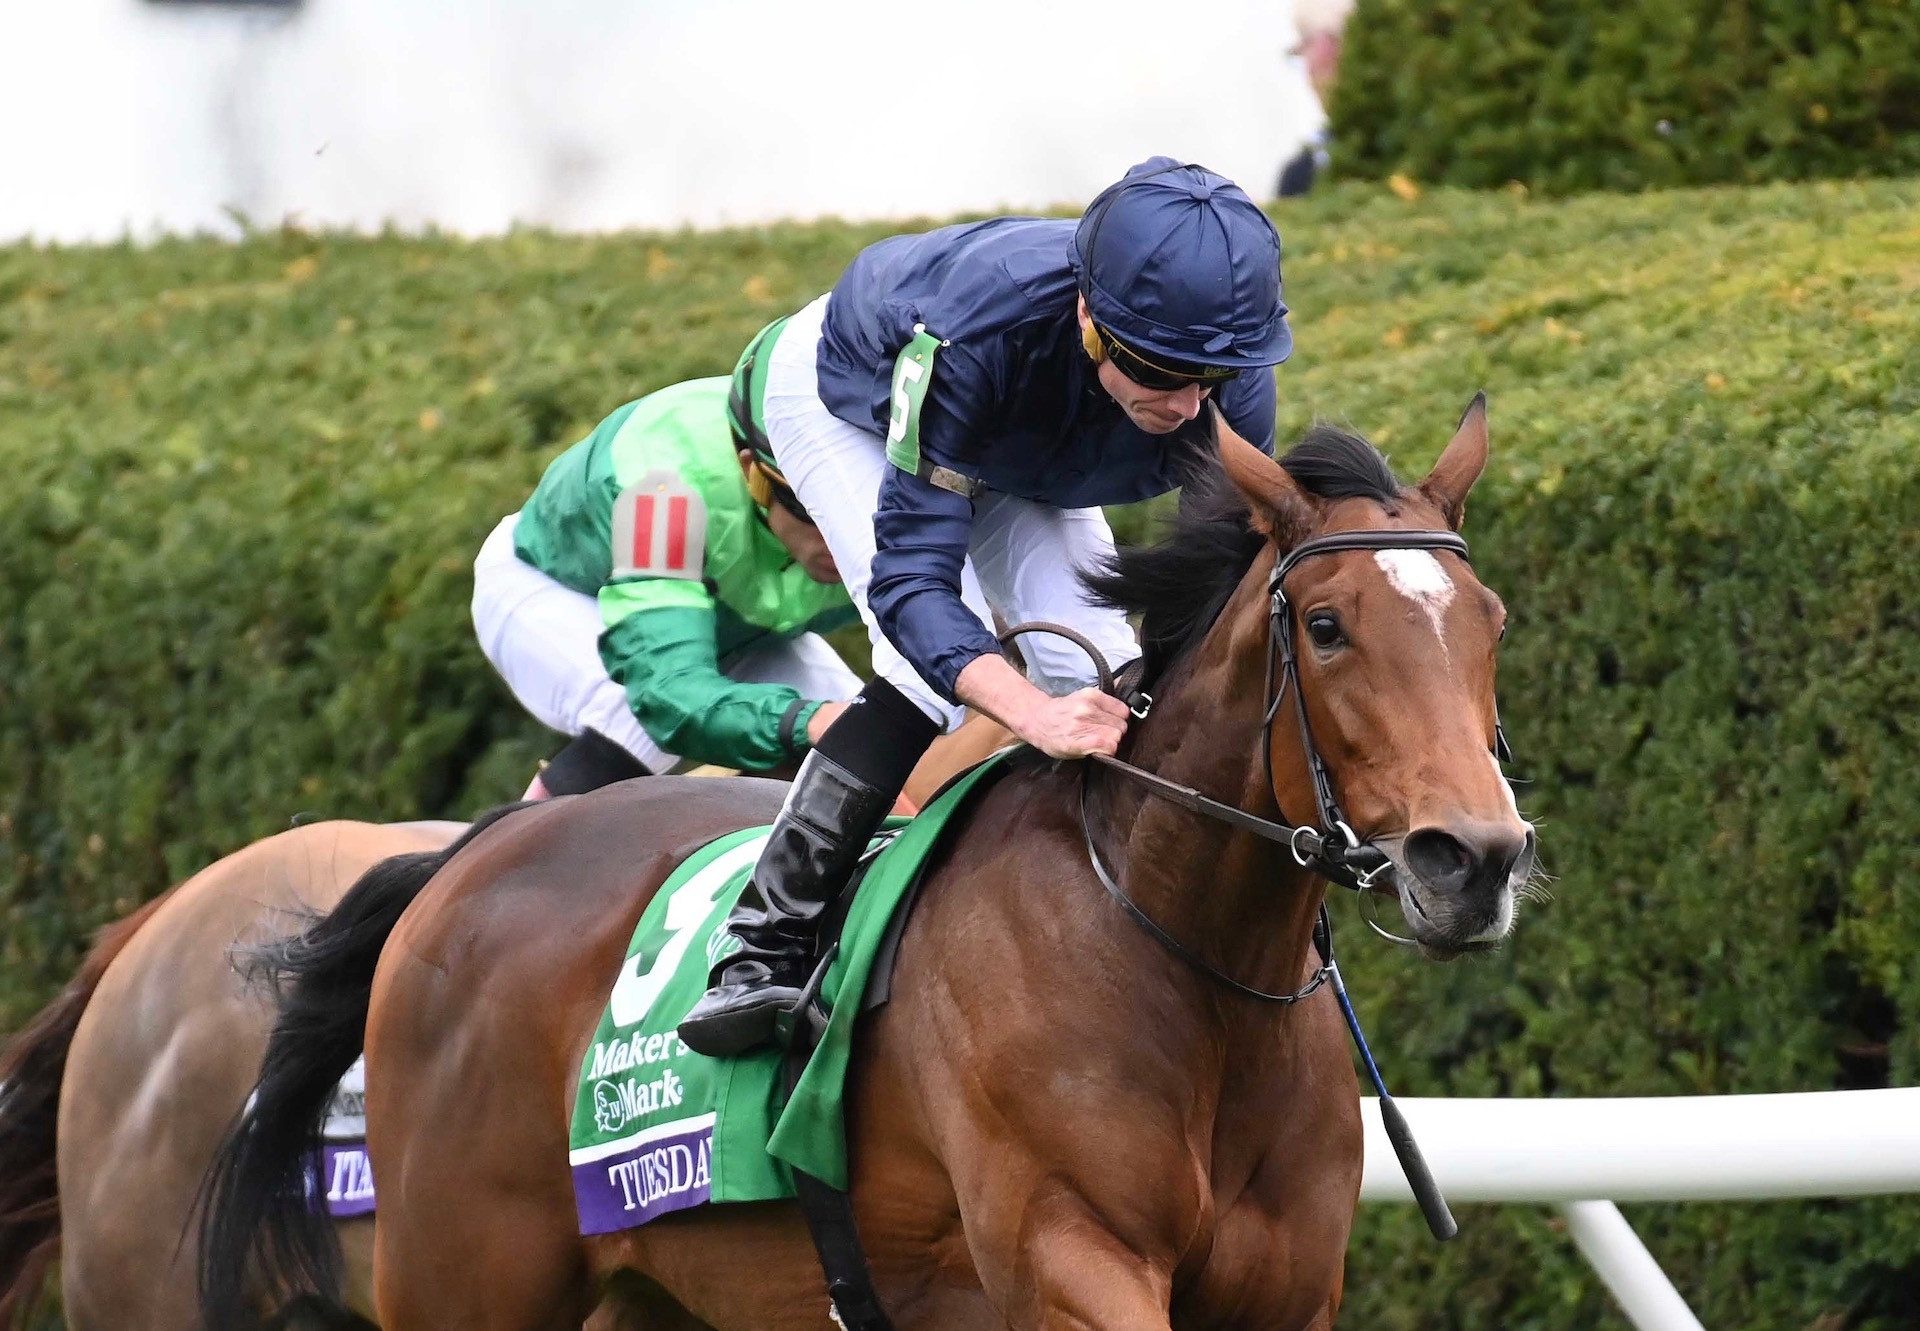 Tuesday (Galileo) Wins The Grade 1 Breeders’ Cup Filly Mare Turf at Keeneland